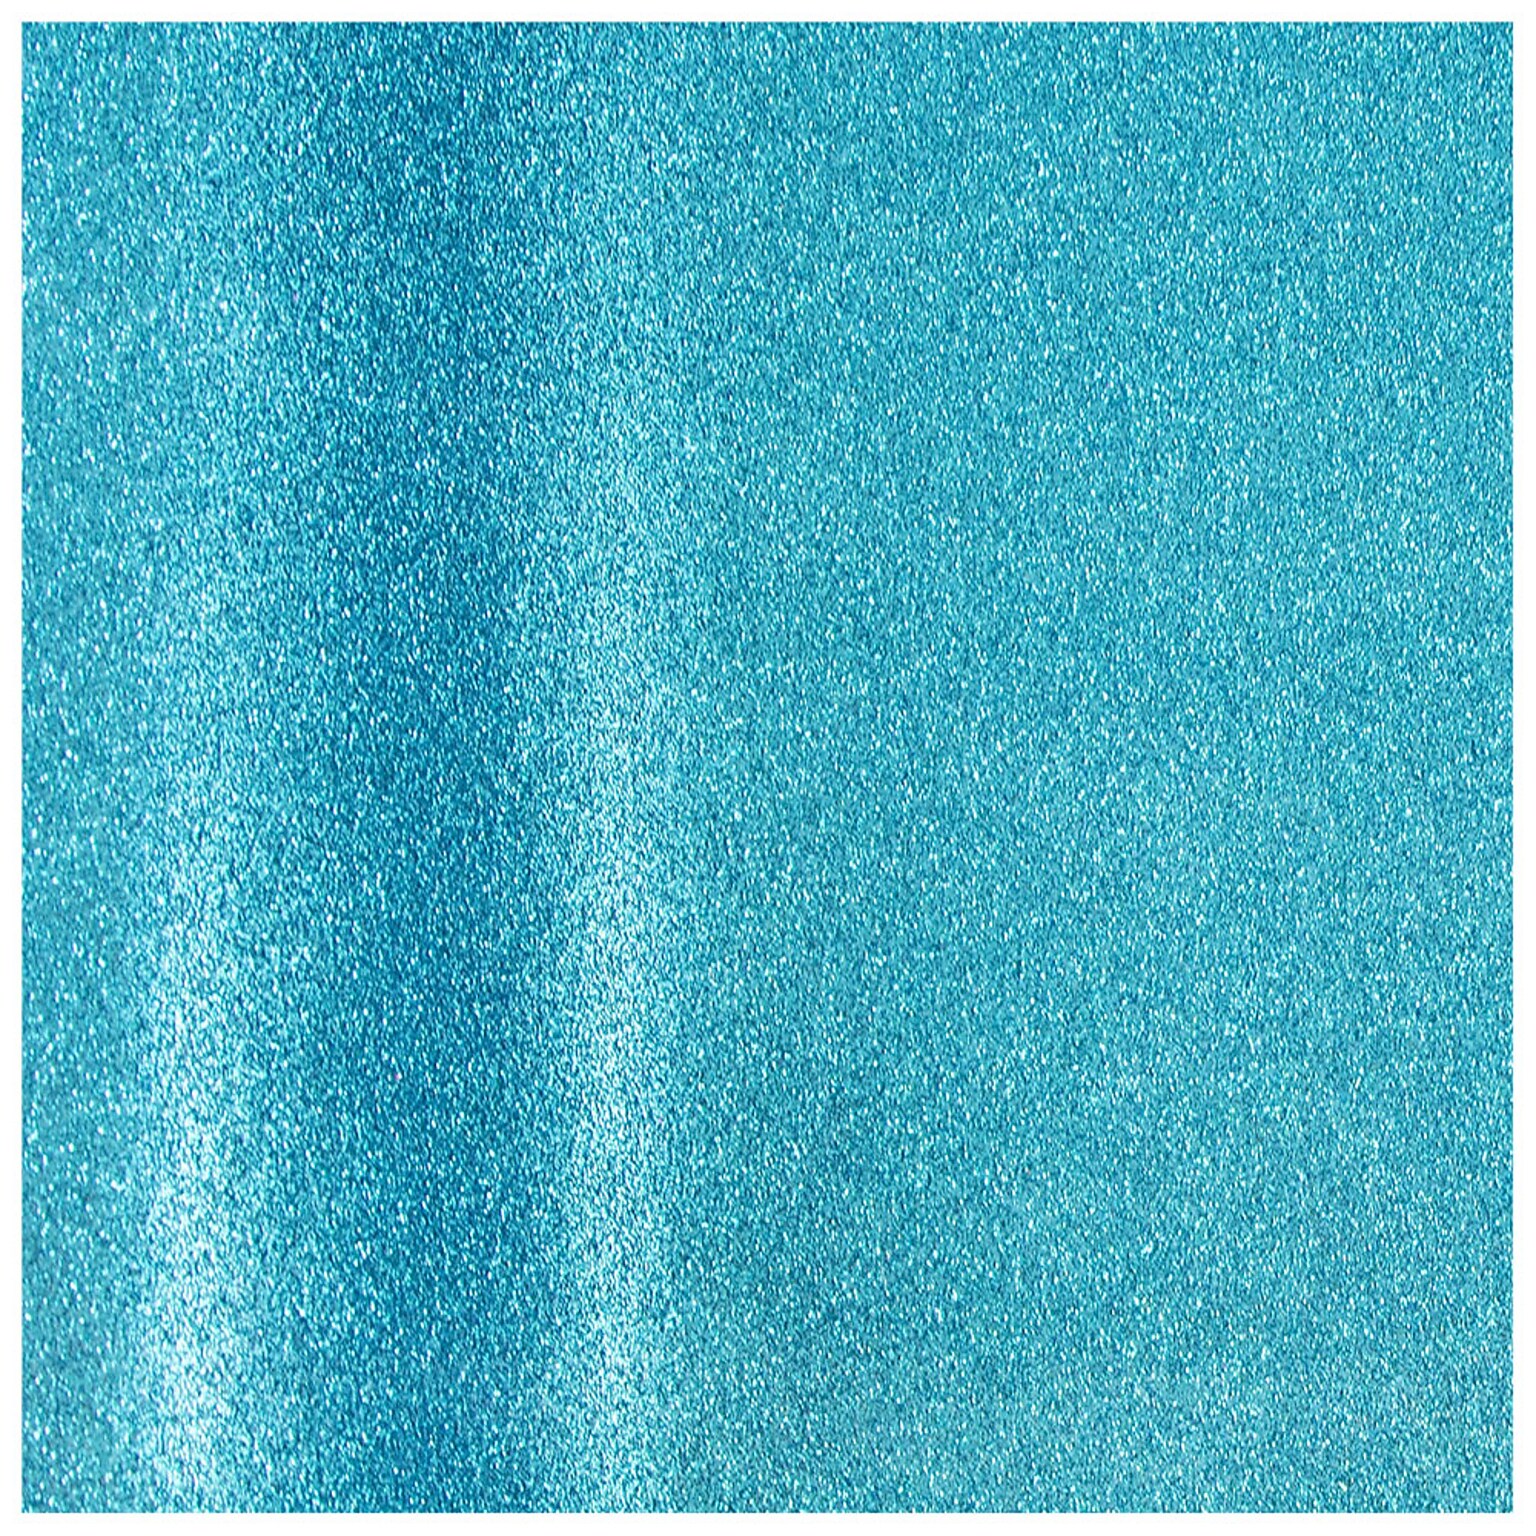 JAM Paper Gift Wrap, Glitter Wrapping Paper, 25 Sq. Ft, Aqua Blue, Roll Sold Individually (354530531)